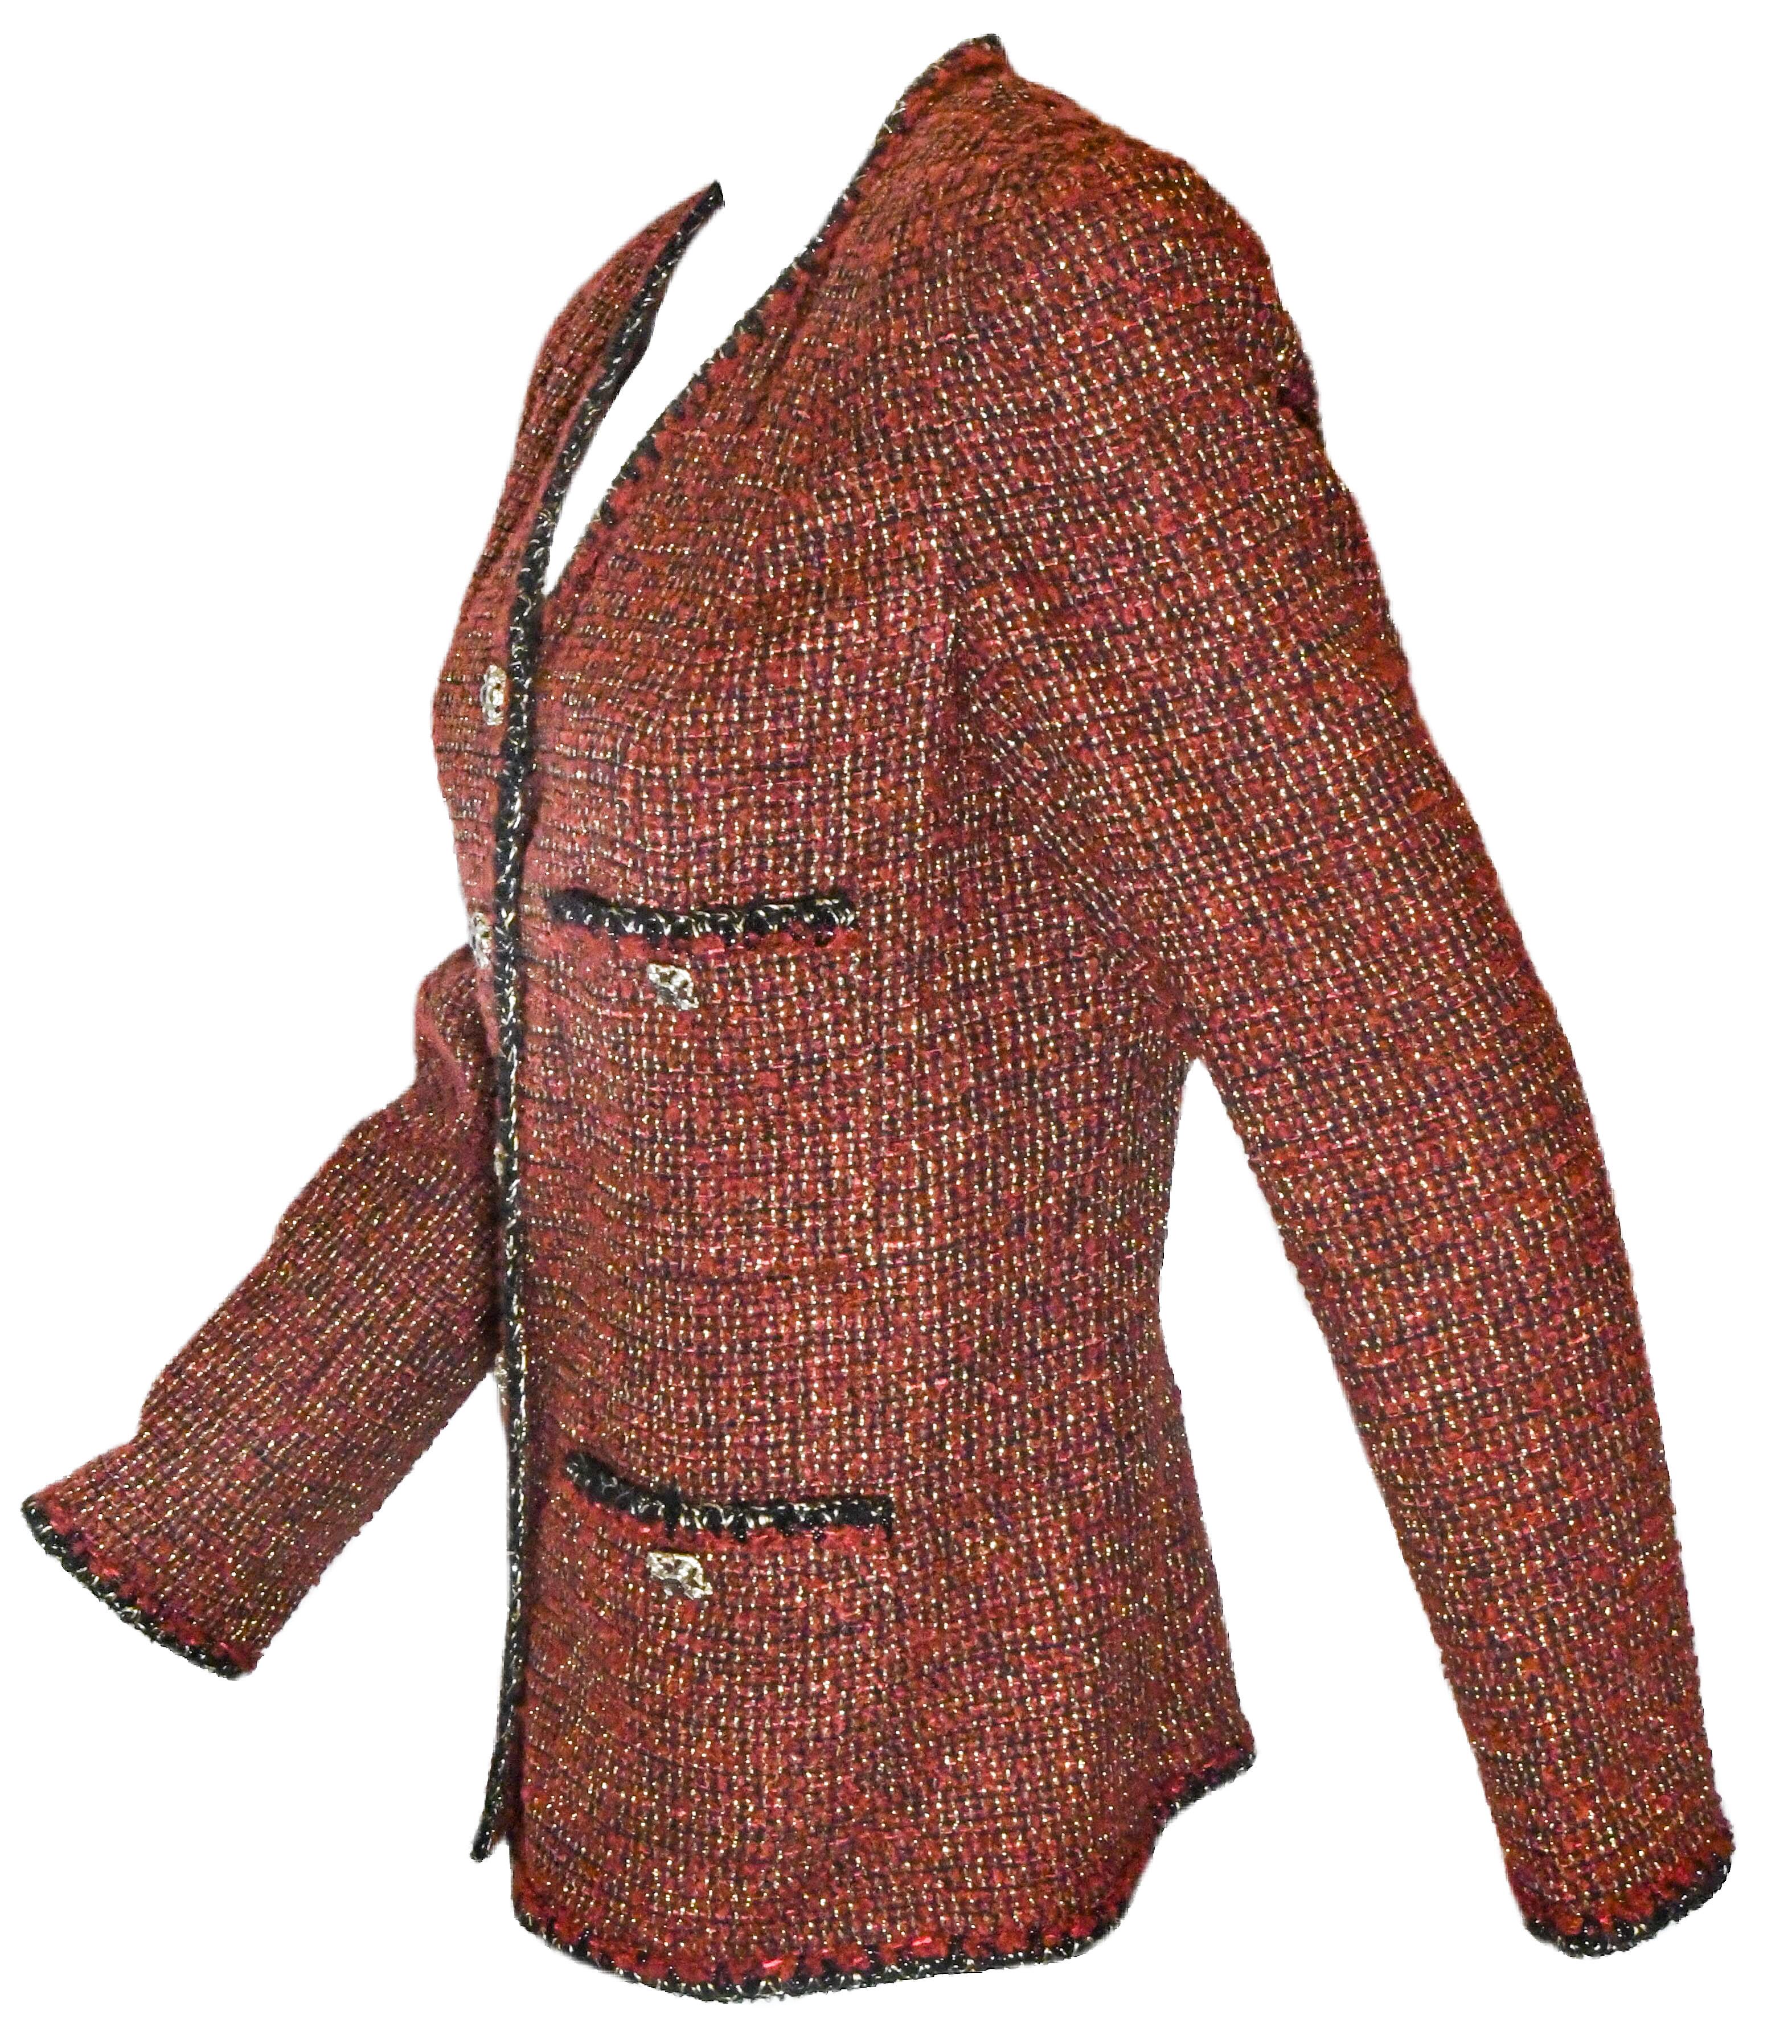 Chanel burgundy black and gold tone tweed jacket is trimmed in black and gold tone threads around neckline, front opening, cuffs and all four front patch pockets.  Each pocket is accentuated with a square buttons decorated with burgundy Gripoix